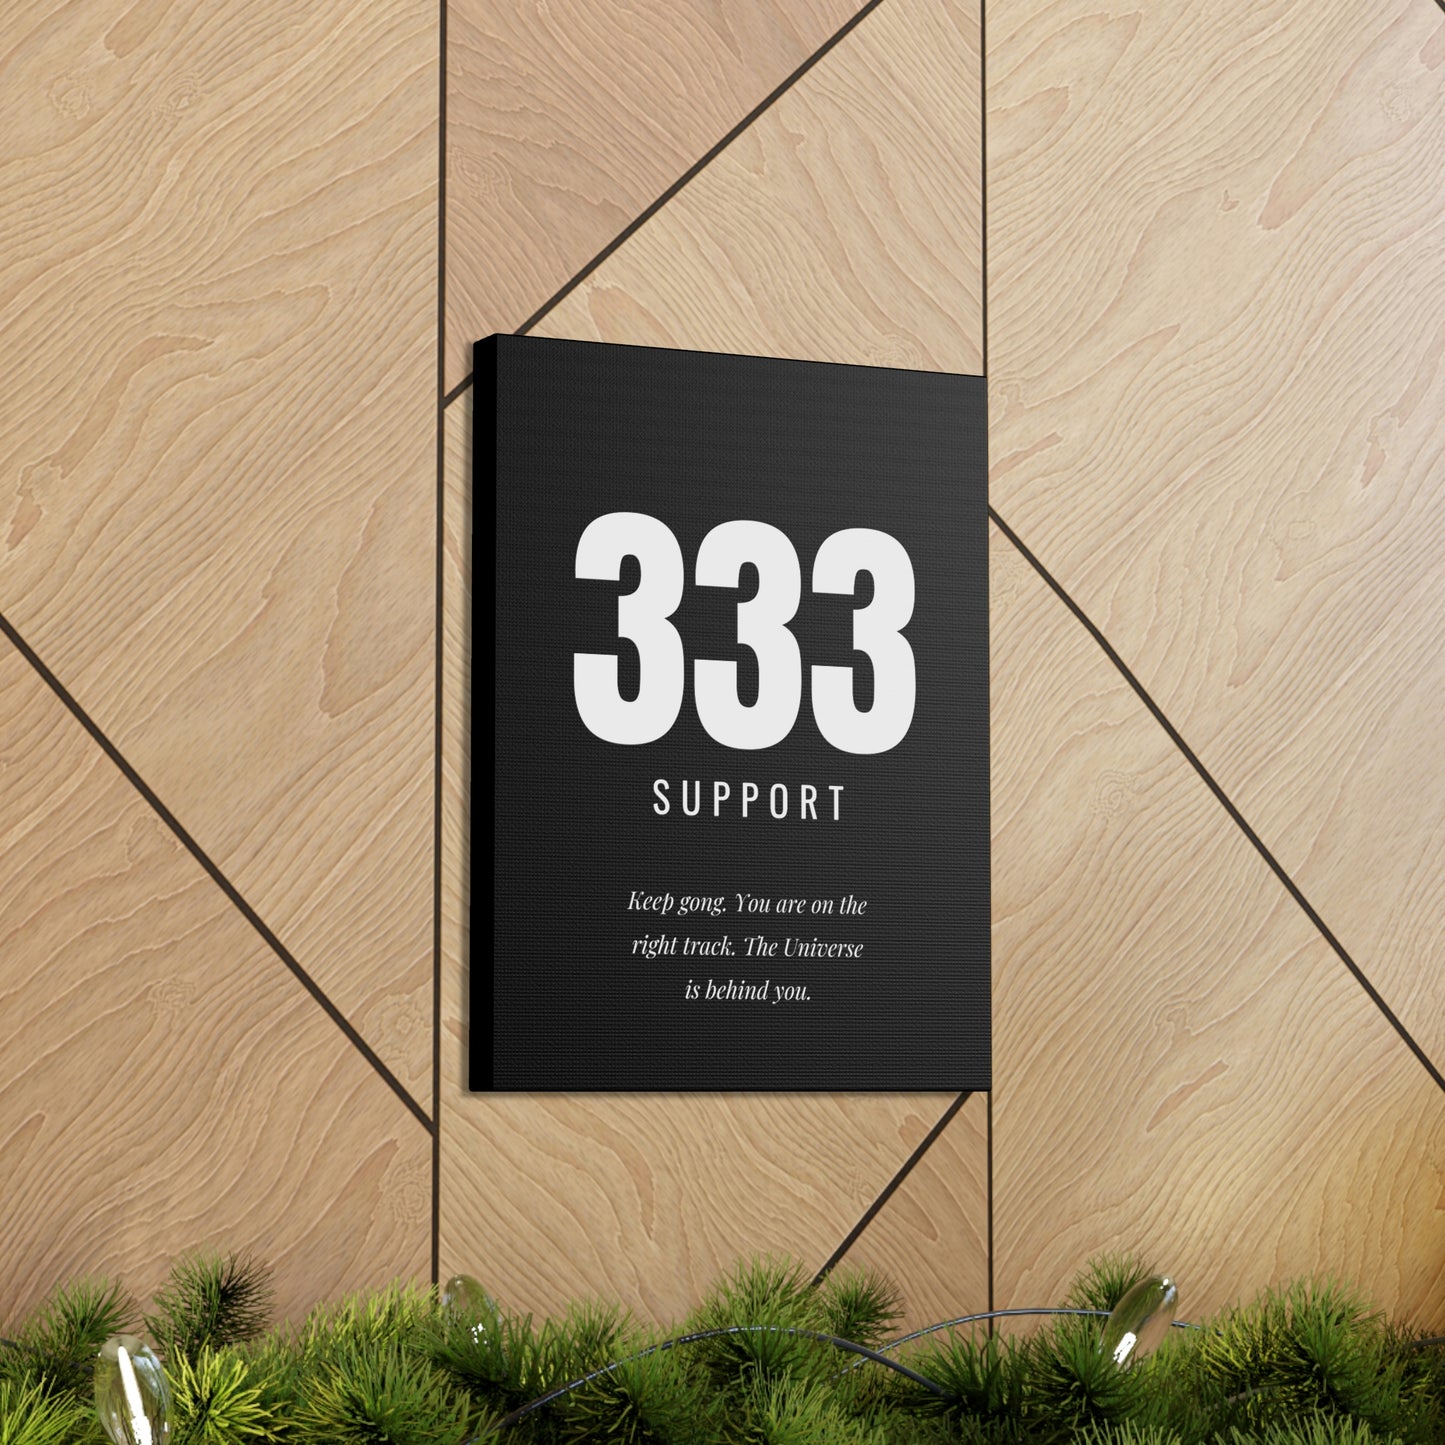 333 Support Canvas Gallery Wrap